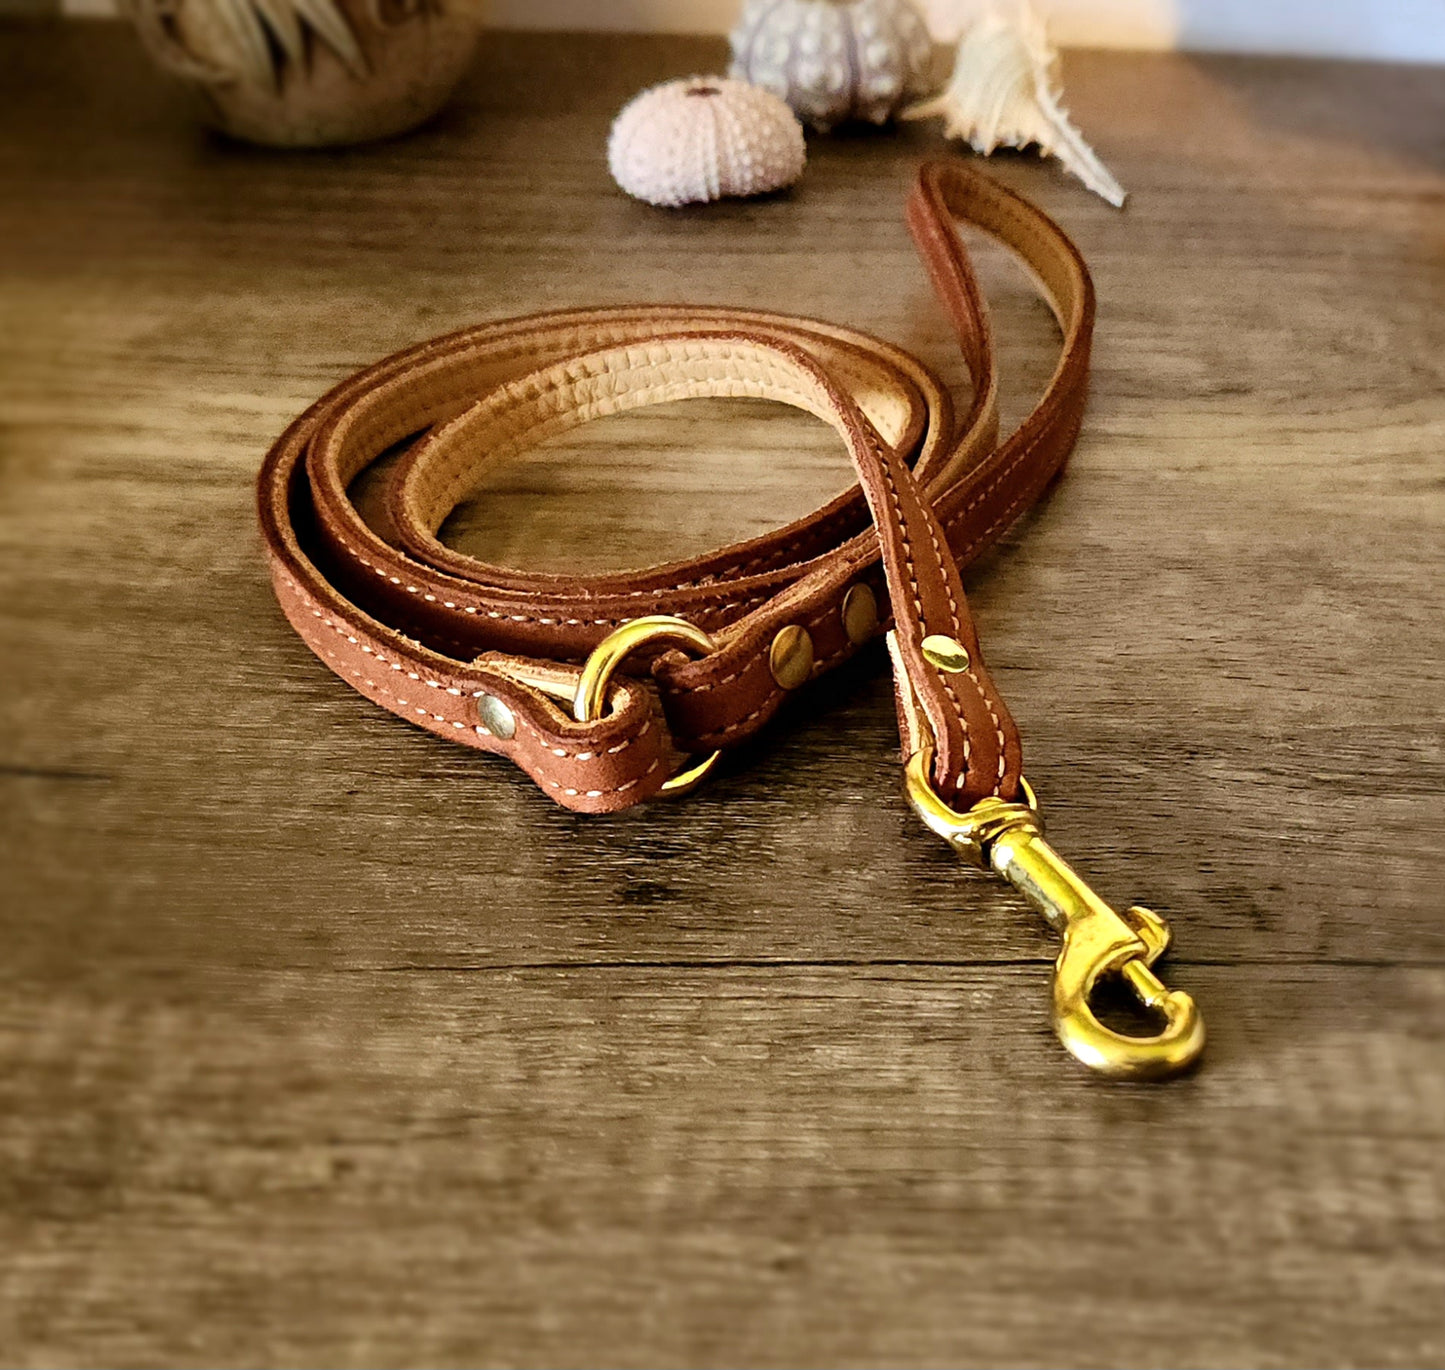 1.2mm wide lined lightweight leashes